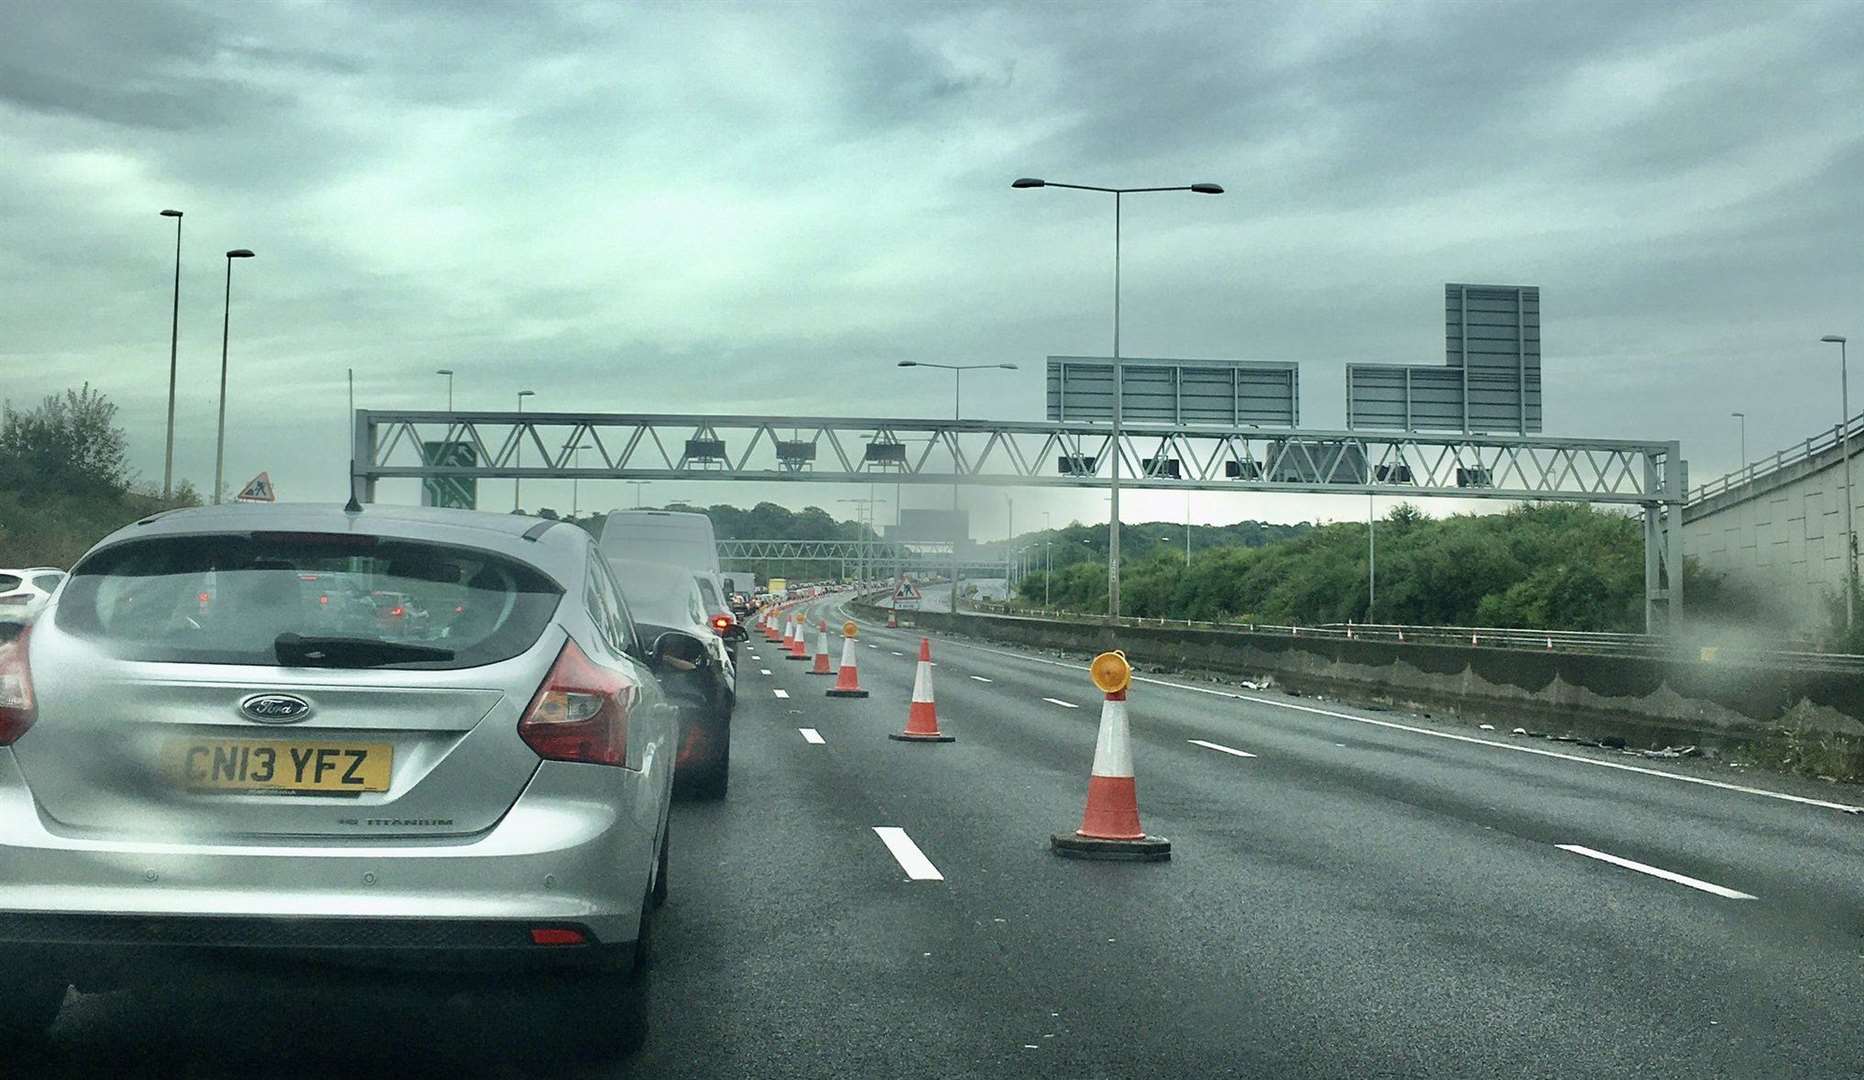 Onlookers described the traffic along the A2 near Bluewater as "mad". Picture: Twitter/@Benb111